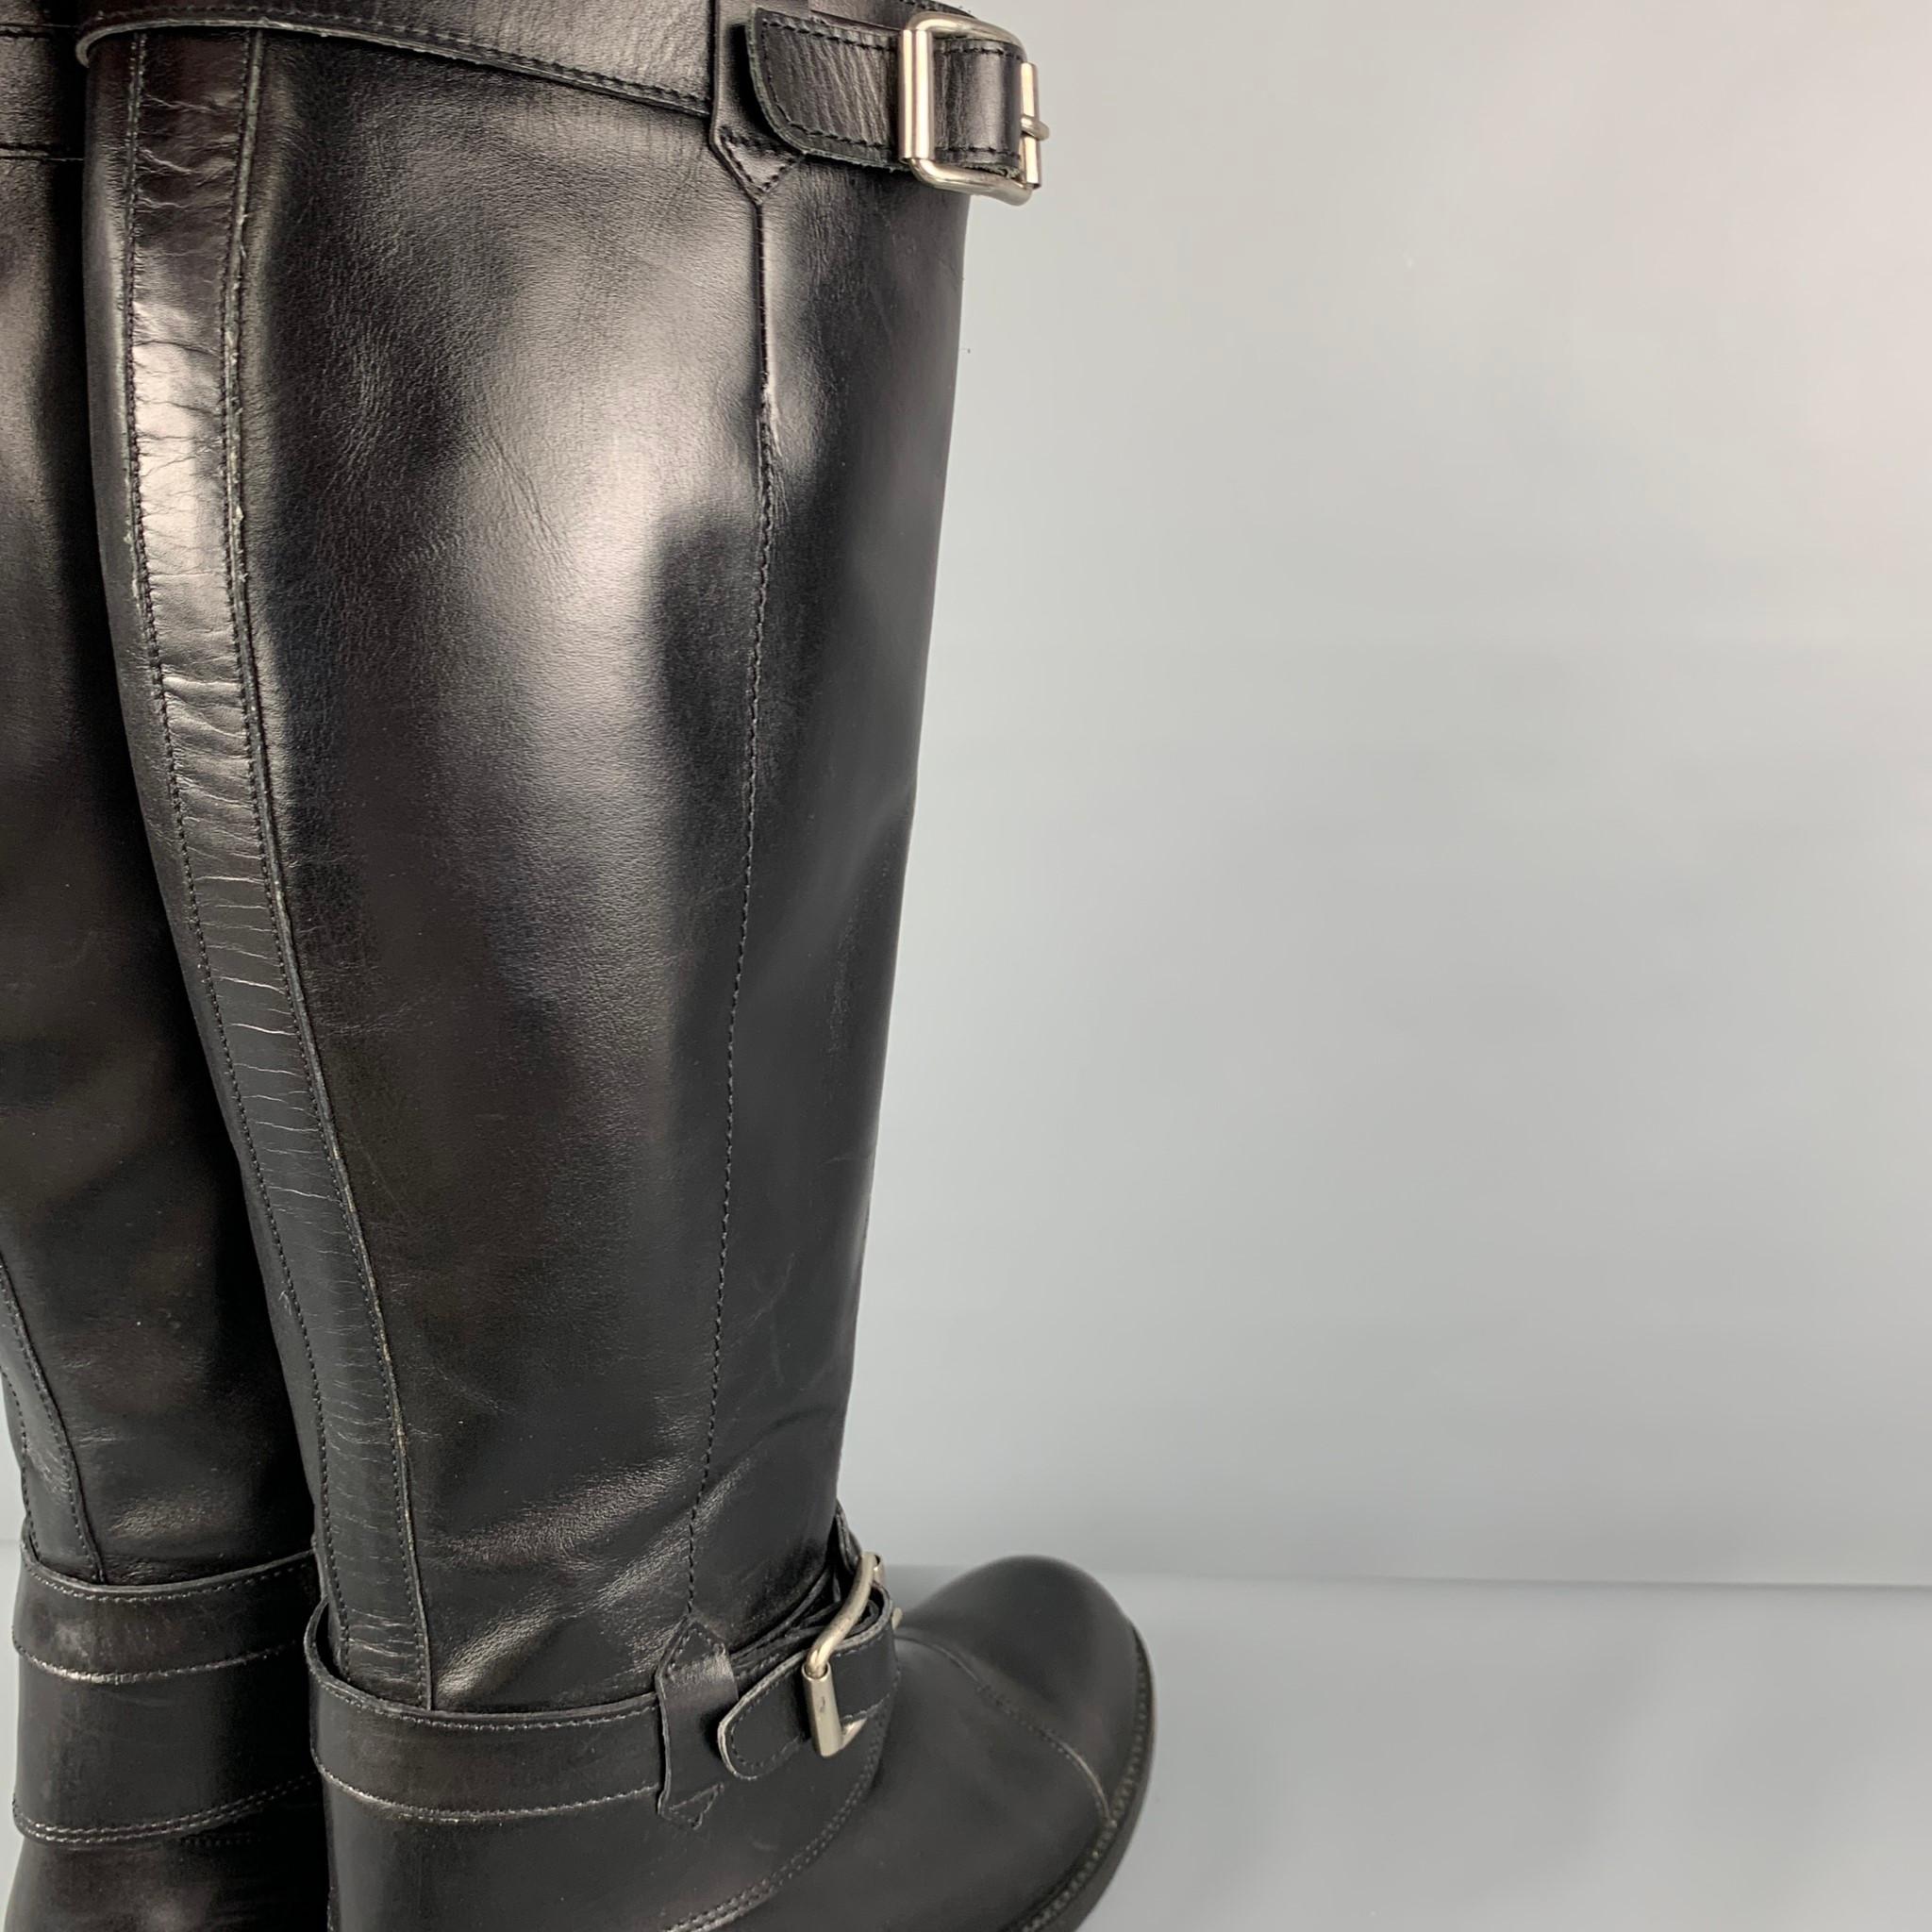 Women's GIORGIO ARMANI Size 9 Black Leather Belted Riding Boots